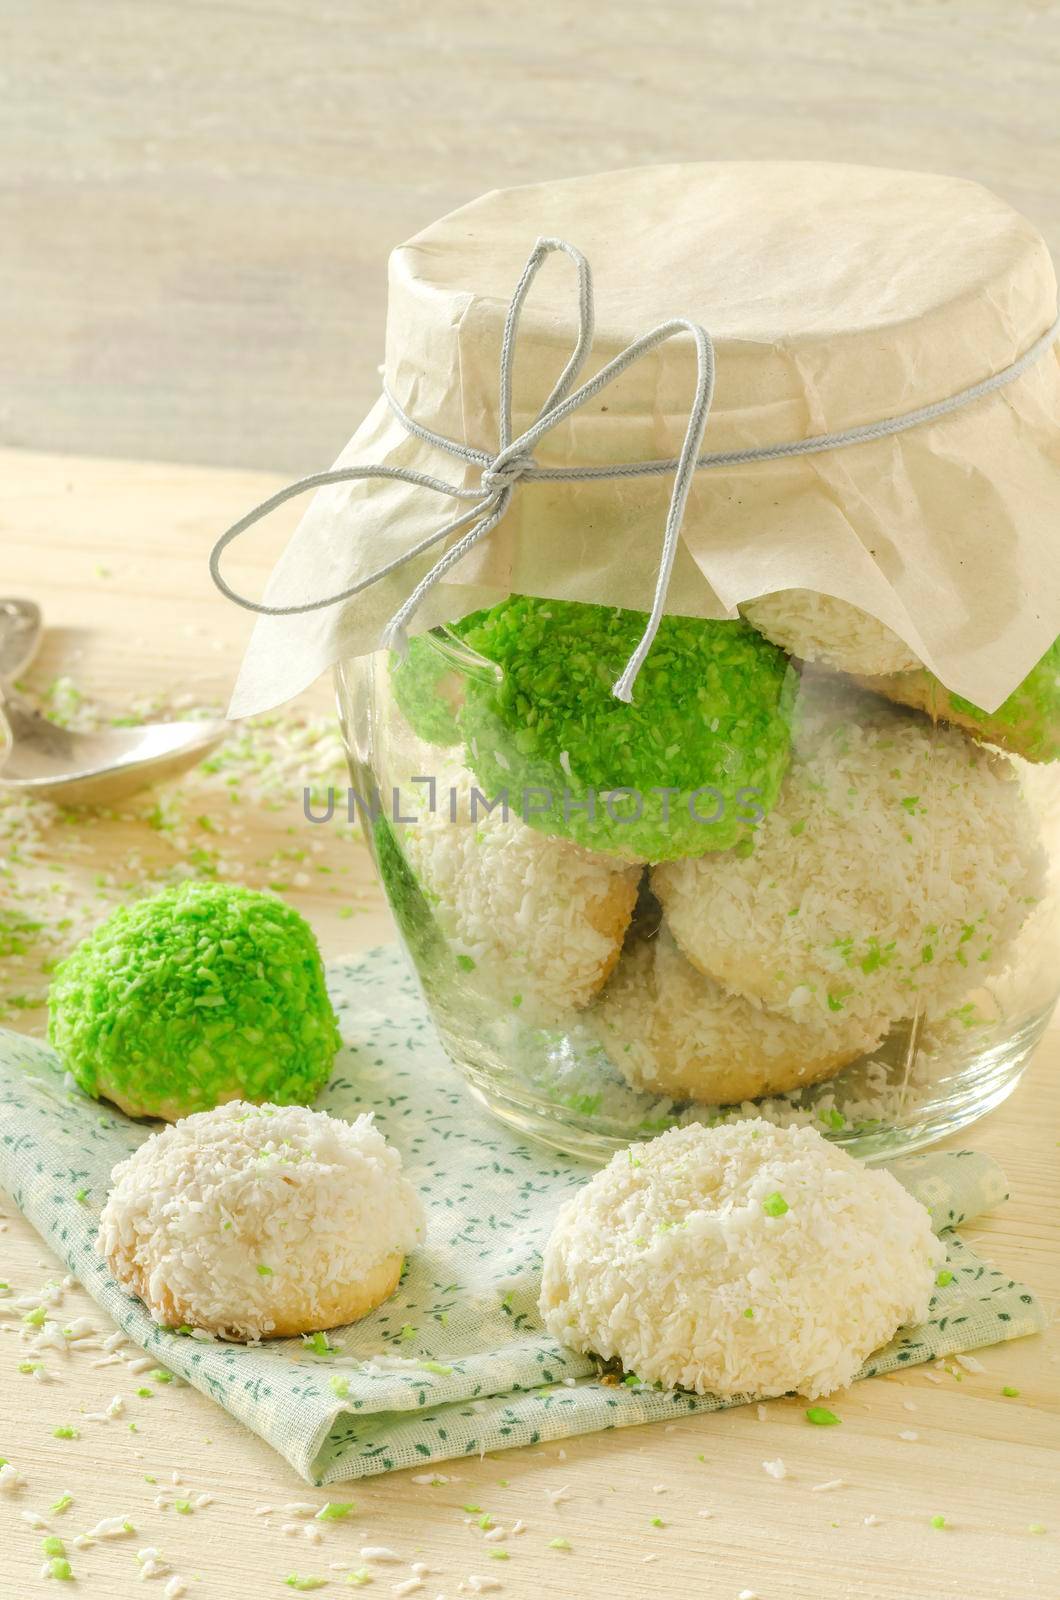 Sugar cookies with coconut flakes in glass jar by zimages